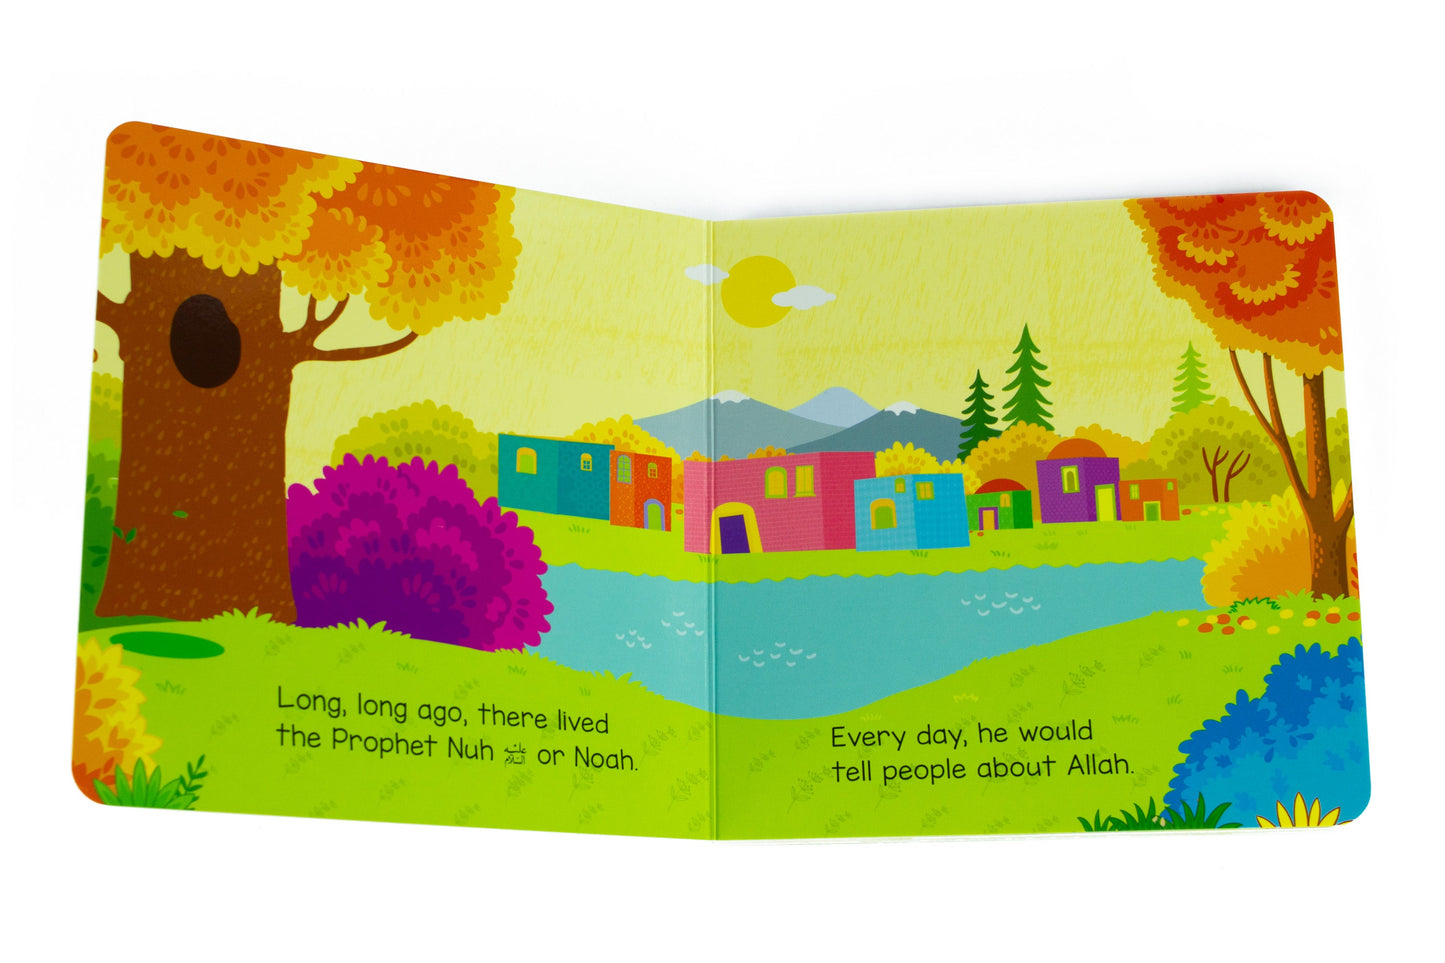 The Ark of Nuh Board Book